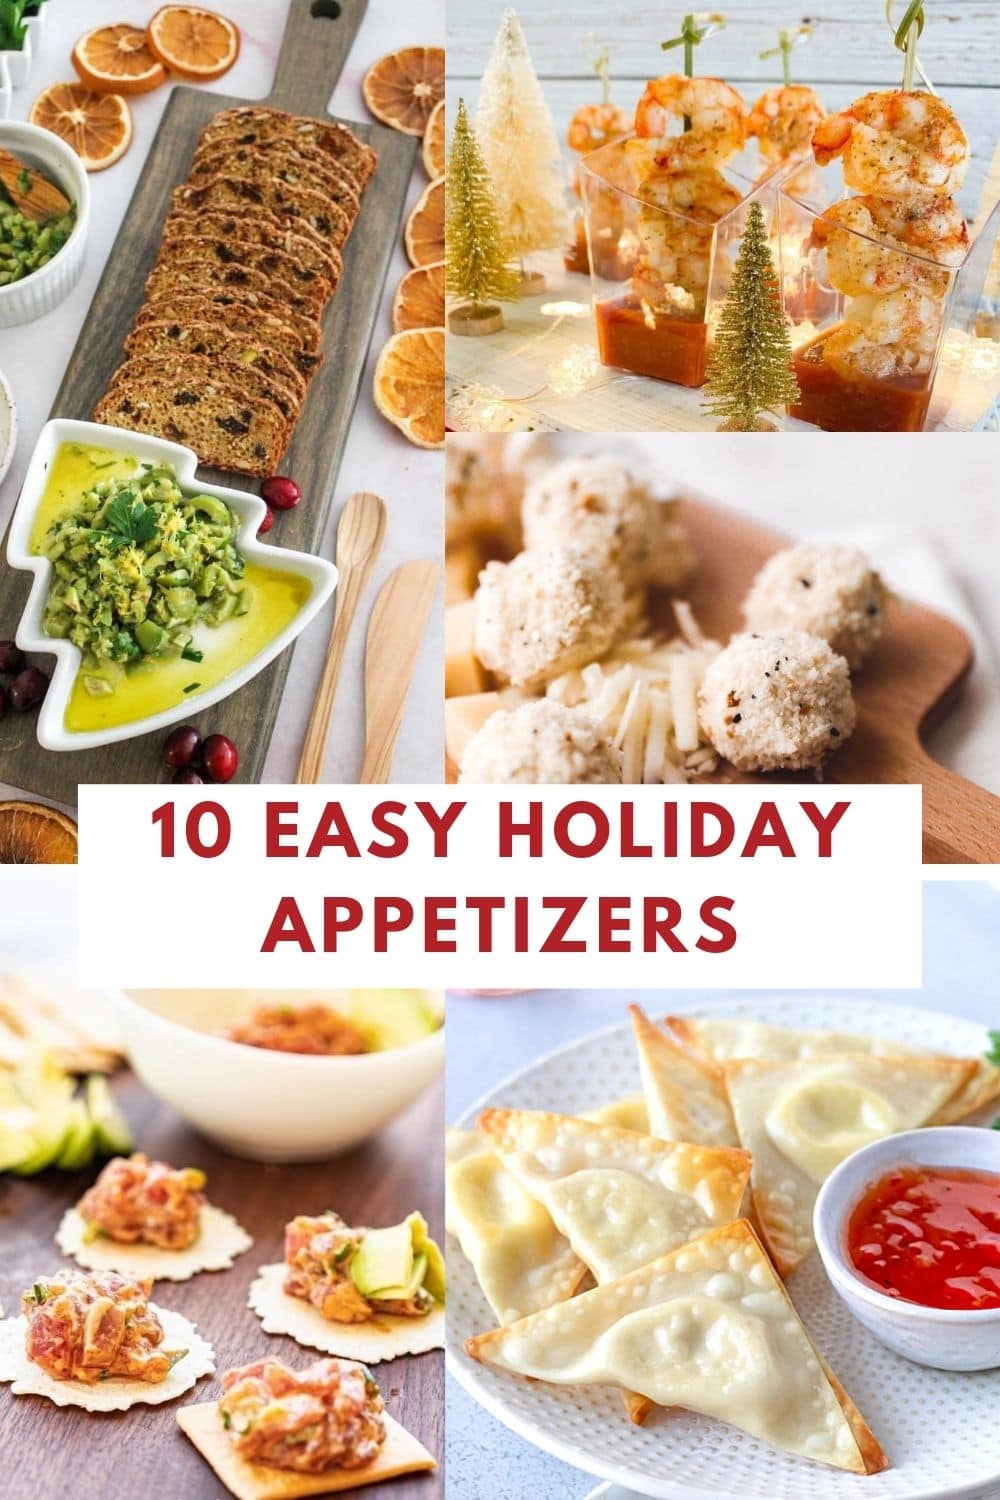 Text Overlay saying '10 Easy Holiday Appetizers' with a collage of different appetizers.